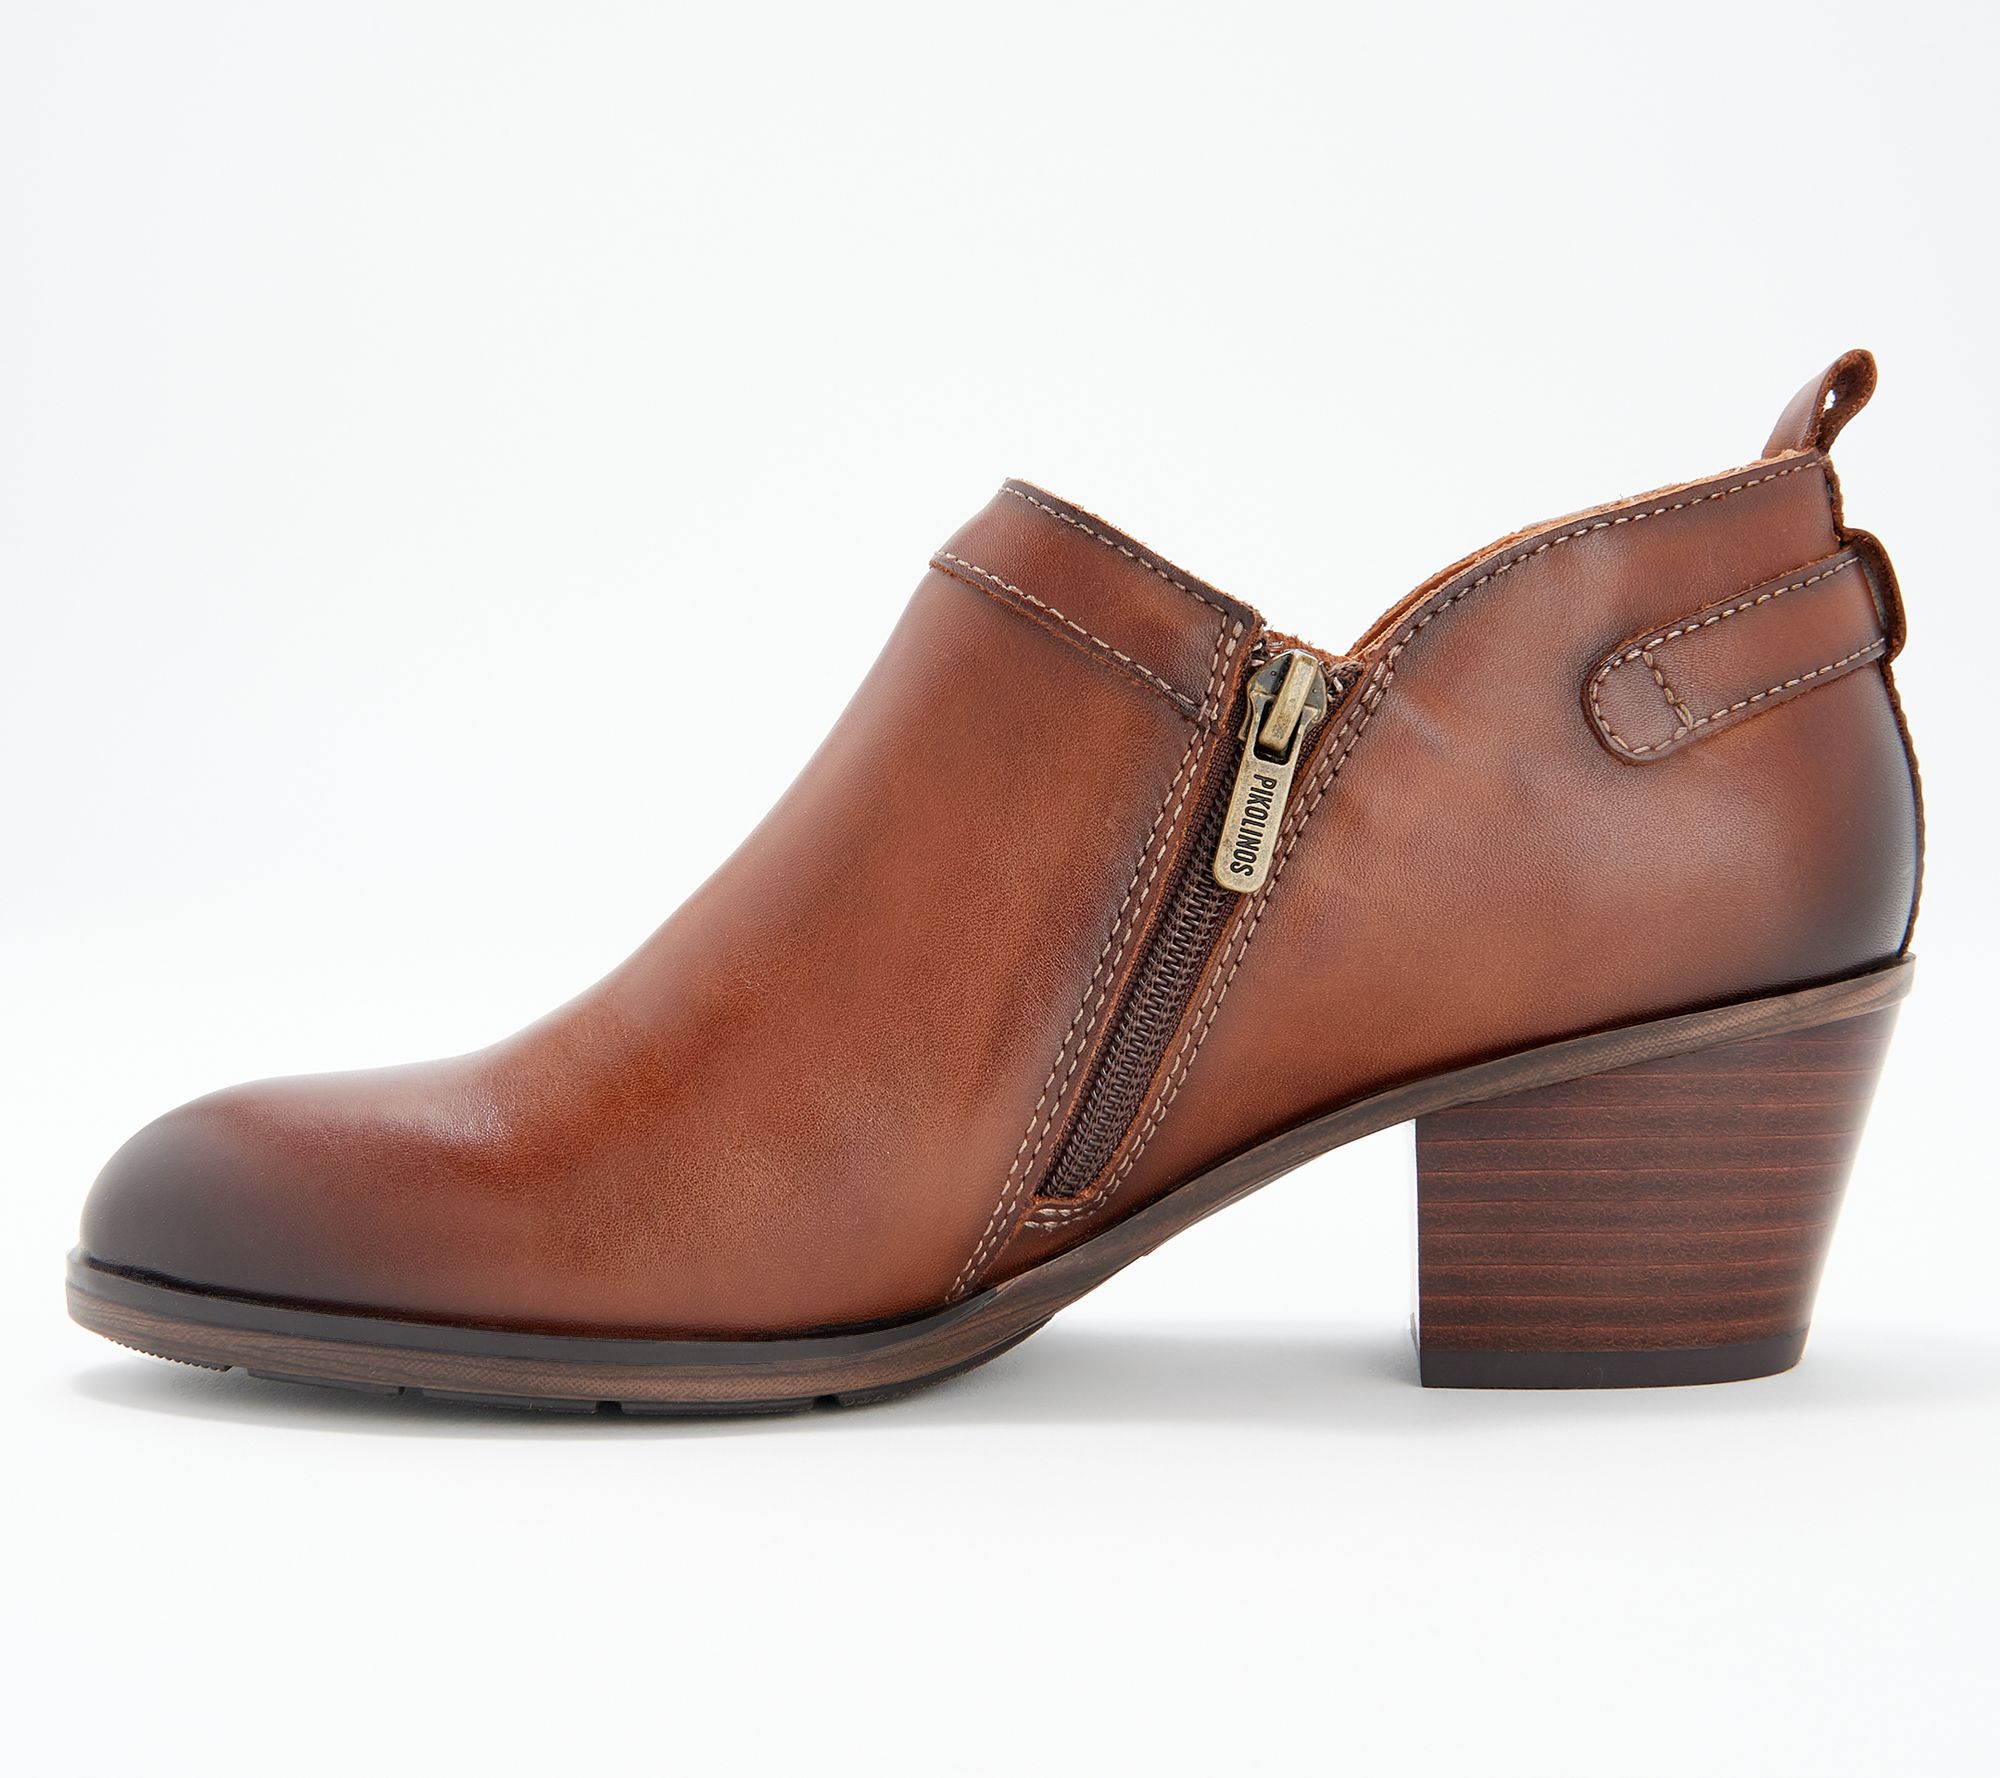 Pikolinos Leather Buckle Booties- Cuenca - QVC.com